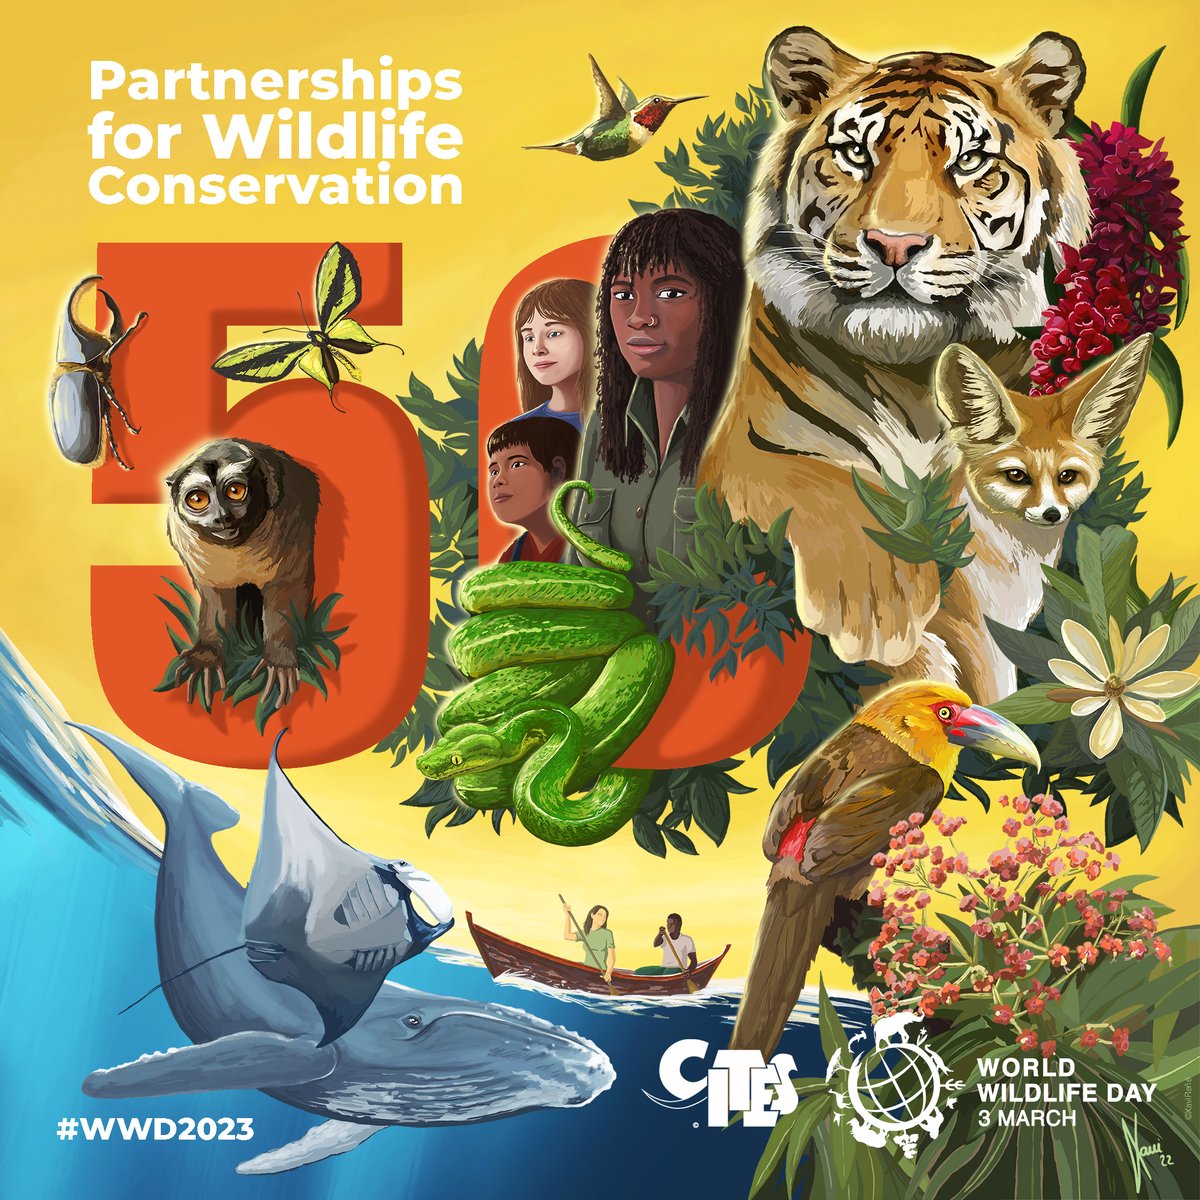 Happy World Wildlife Day and 50th anniversary to CITES and the Endangered Species Act!
This year's theme is #PartnershipsforConservation.